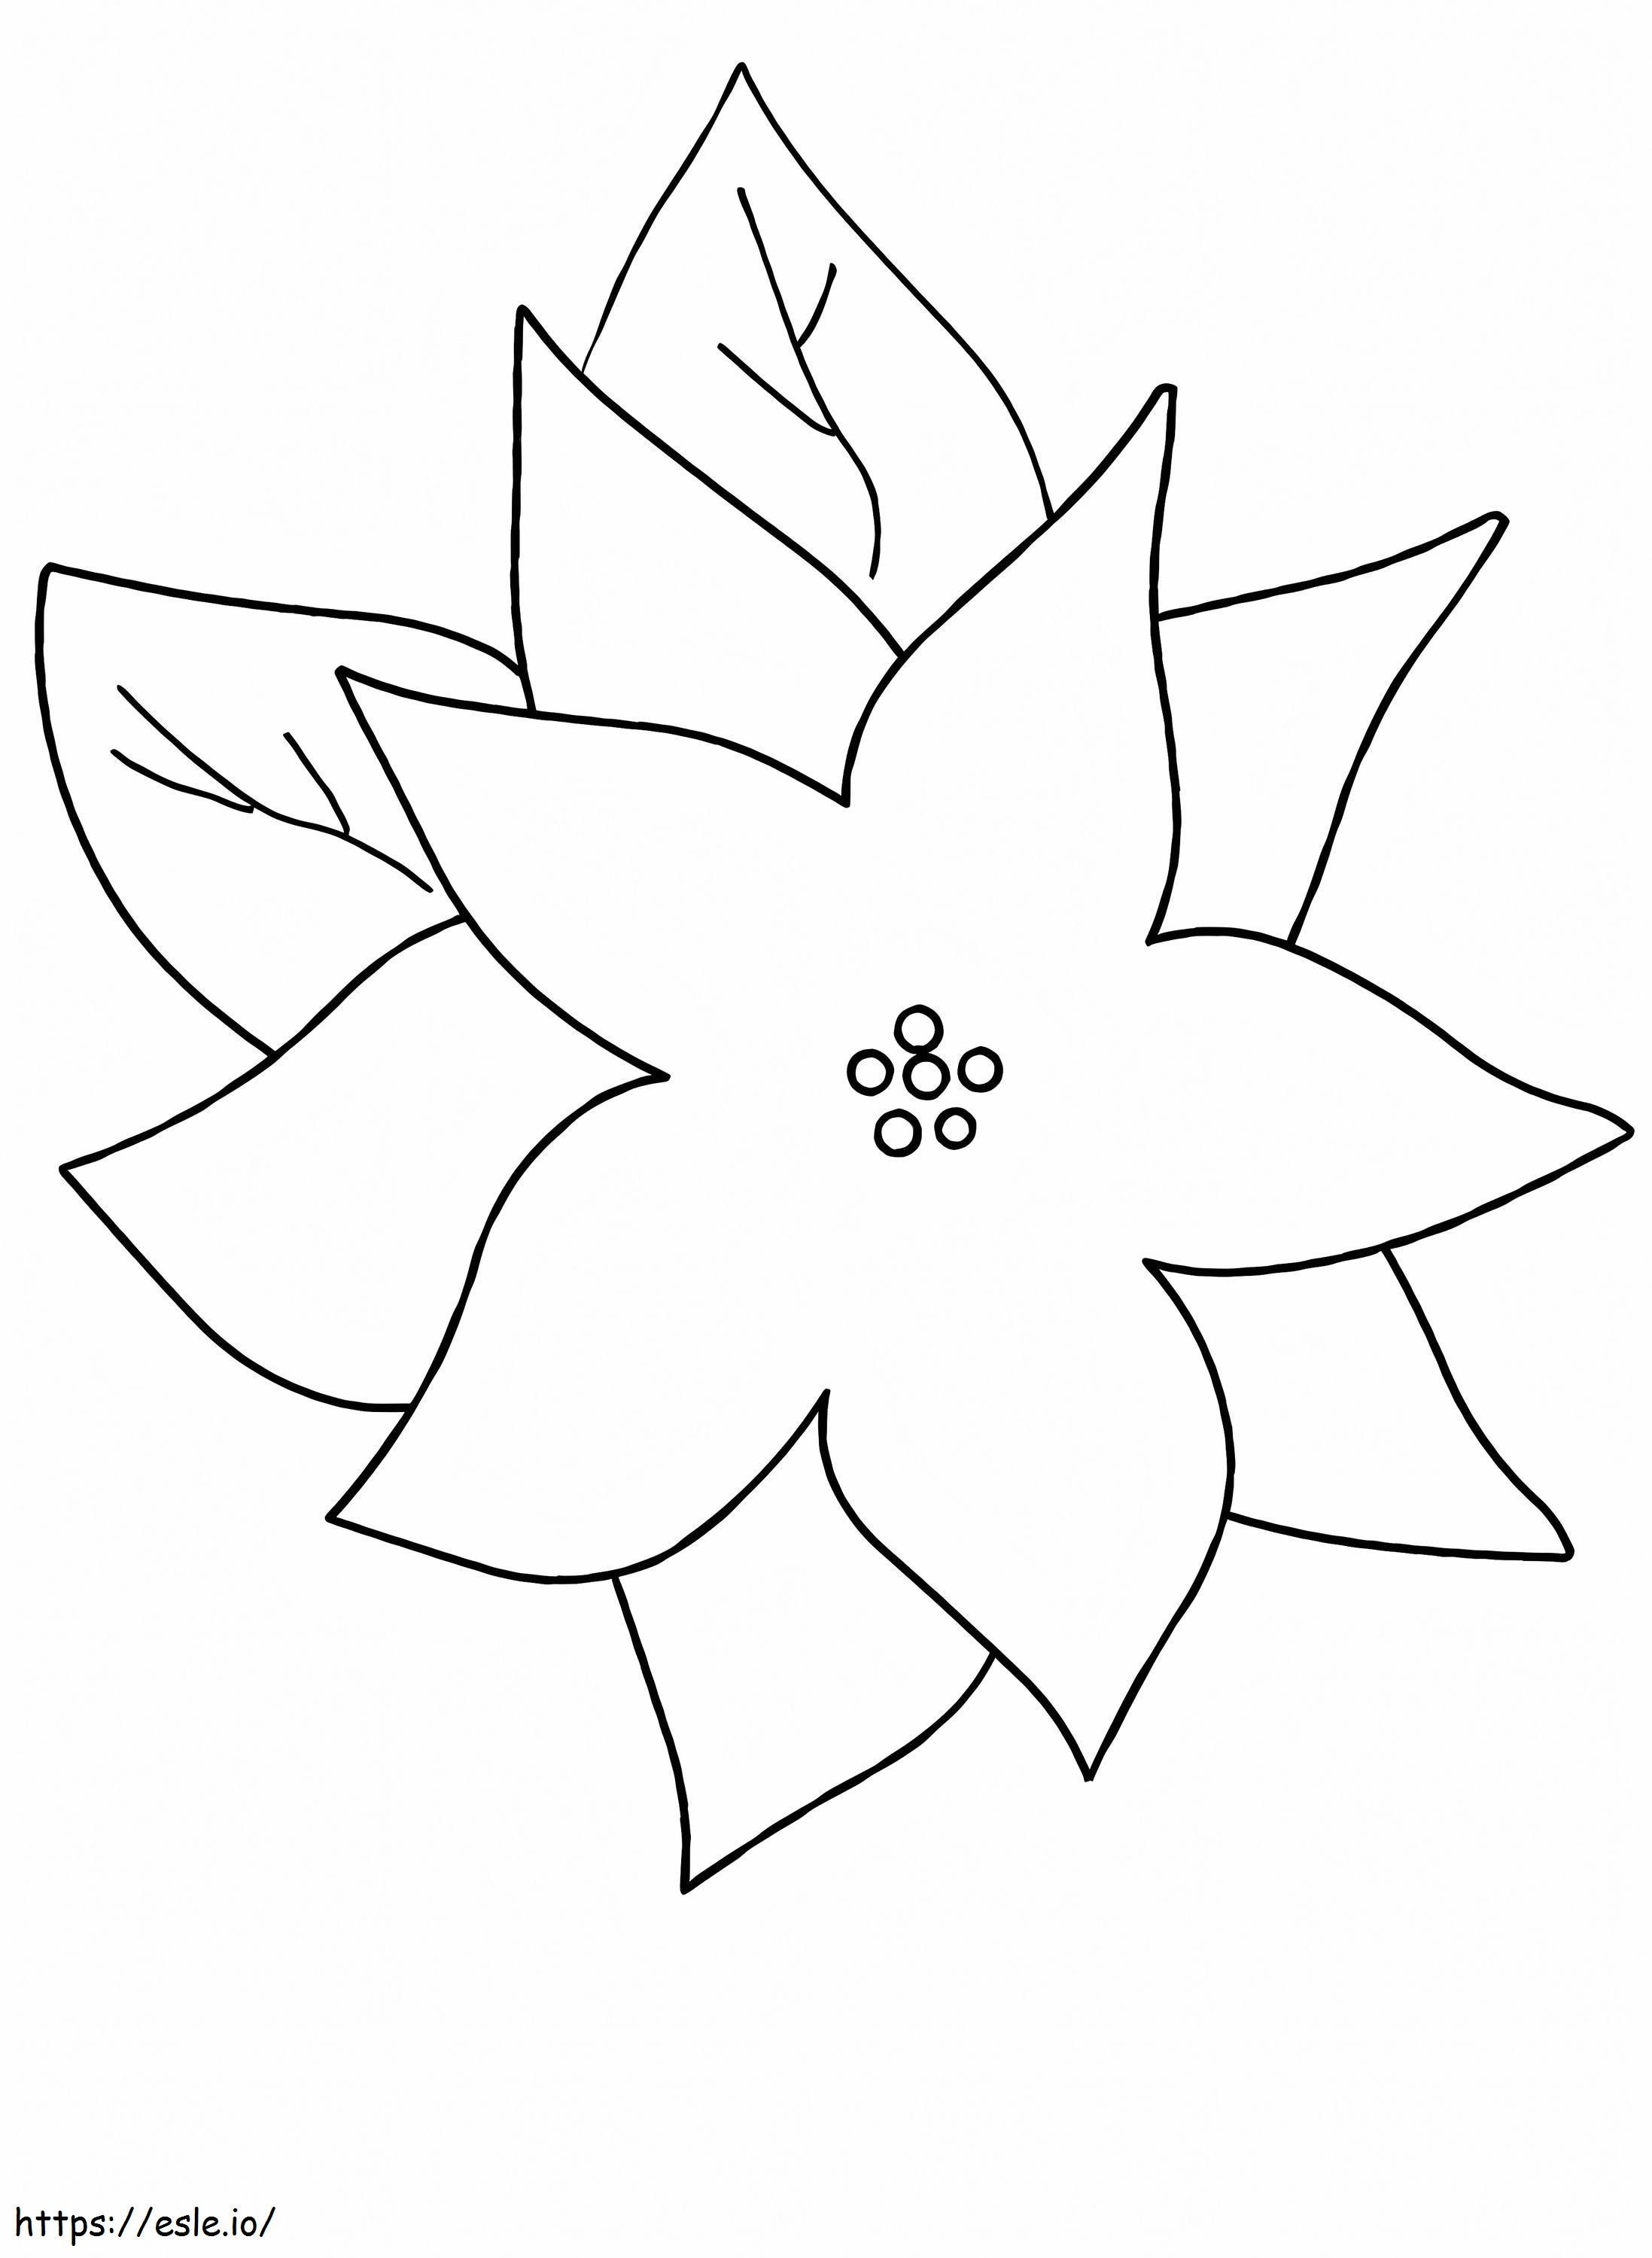 Big Poinsettia Flower coloring page